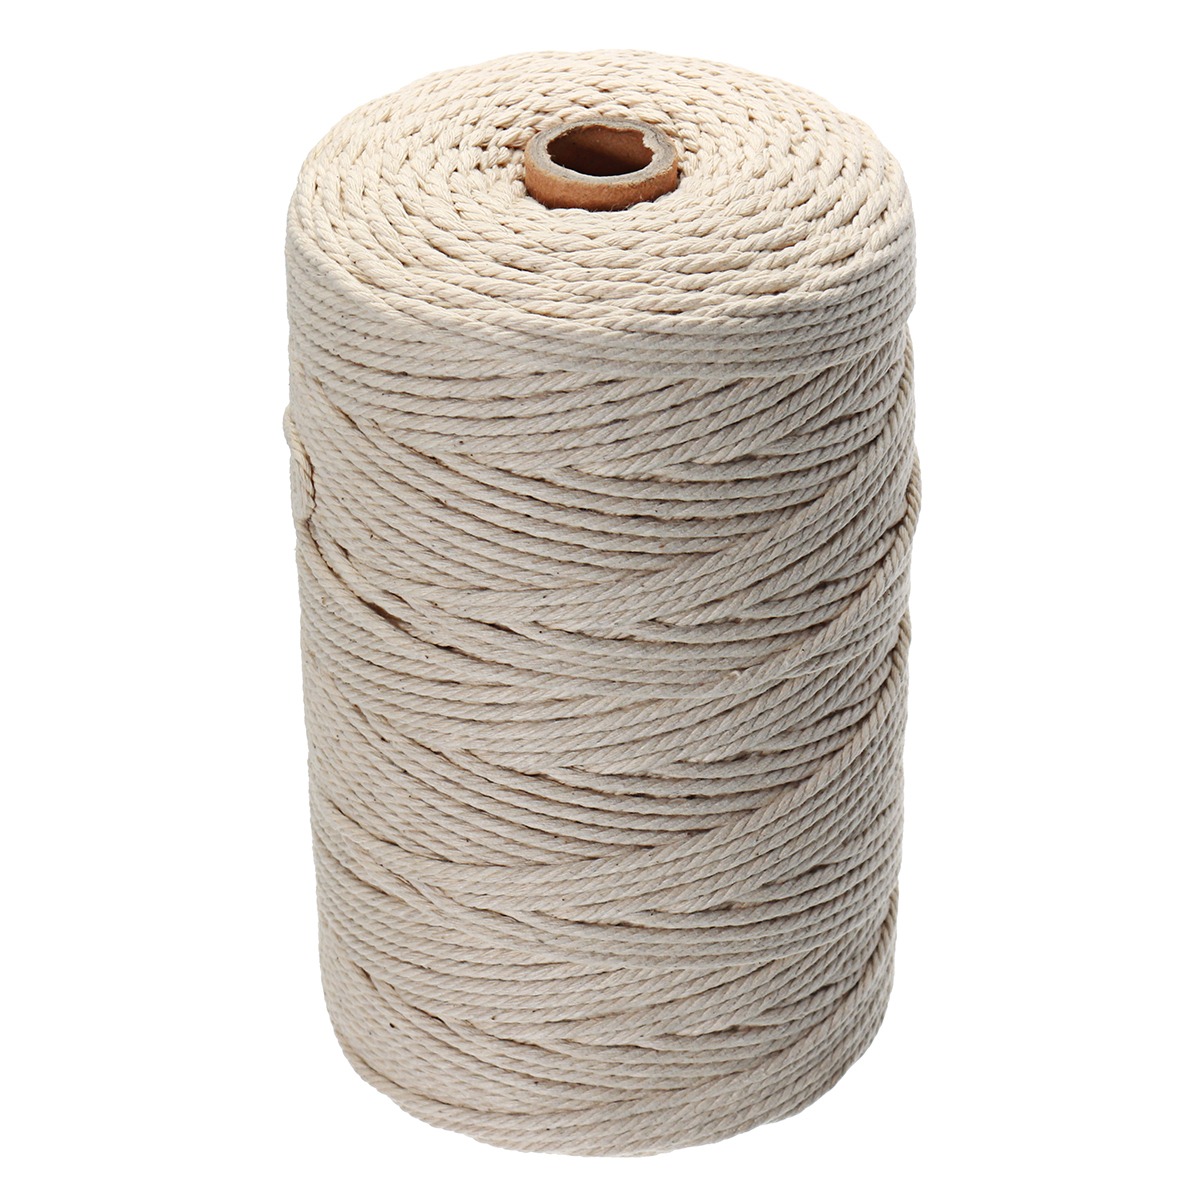 5Pcs-200Mx3mm-Natural-Beige-Cotton-Twisted-Cord-Rope-Braided-Wire-DIY-Craft-Macrame-String-1396554-3